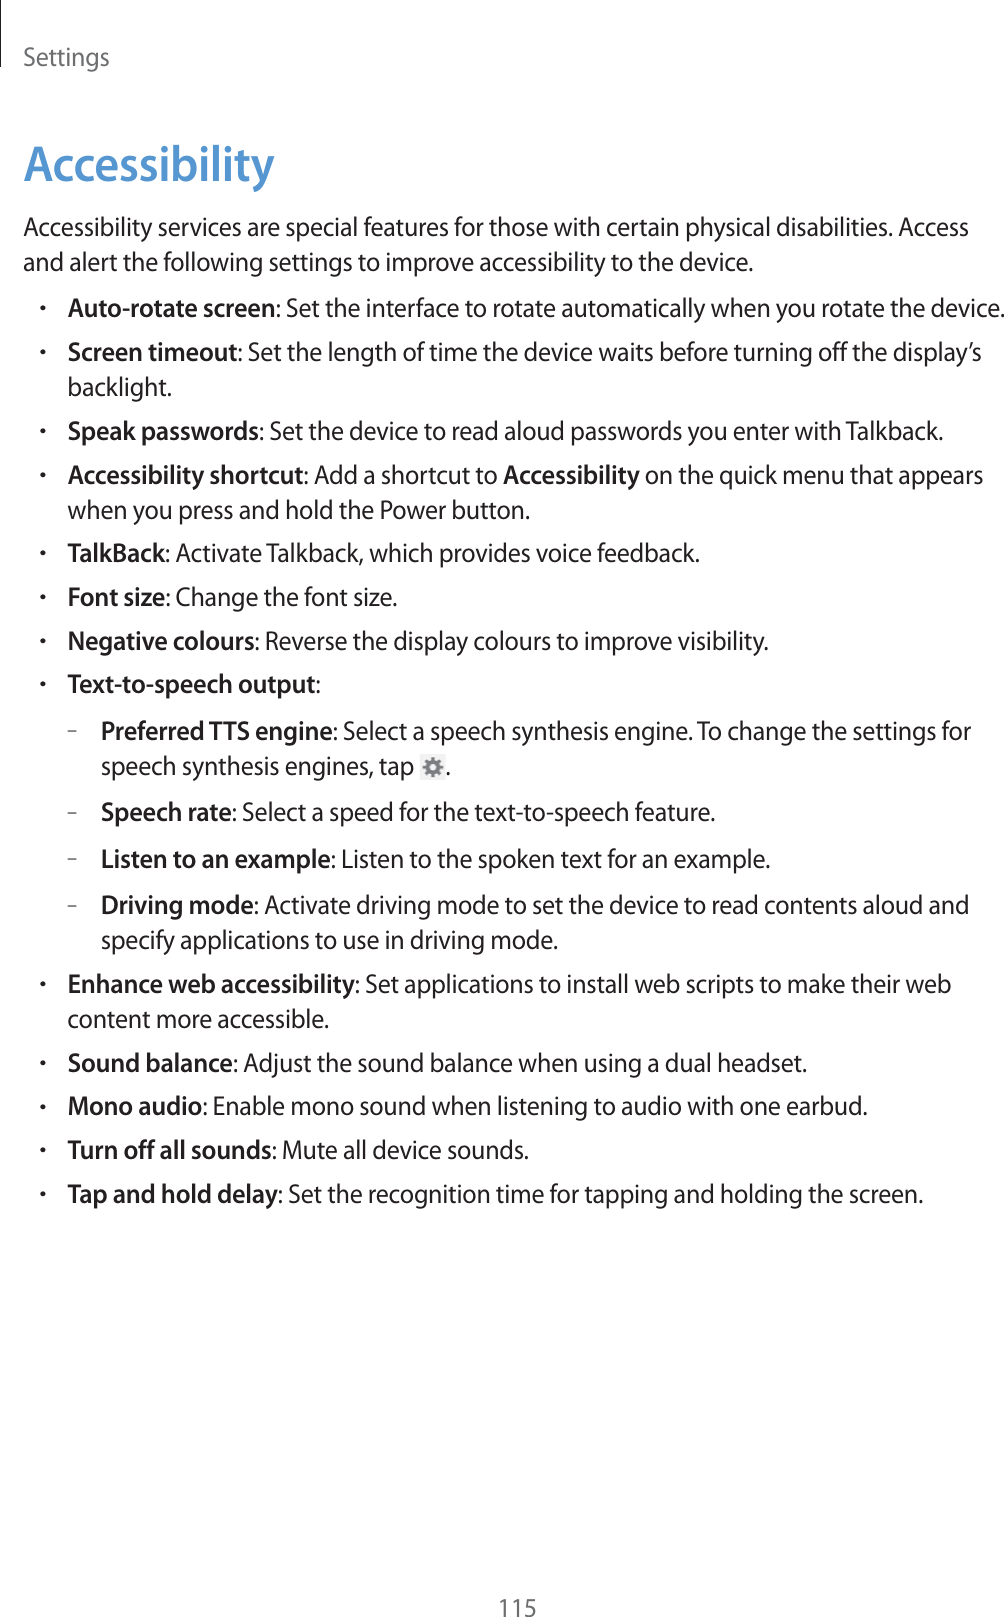 Settings115AccessibilityAccessibility services are special features for those with certain physical disabilities. Access and alert the following settings to improve accessibility to the device.rAuto-rotate screen: Set the interface to rotate automatically when you rotate the device.rScreen timeout: Set the length of time the device waits before turning off the display’s backlight.rSpeak passwords: Set the device to read aloud passwords you enter with Talkback.rAccessibility shortcut: Add a shortcut to Accessibility on the quick menu that appears when you press and hold the Power button.rTalkBack: Activate Talkback, which provides voice feedback.rFont size: Change the font size.rNegative colours: Reverse the display colours to improve visibility.rText-to-speech output:–Preferred TTS engine: Select a speech synthesis engine. To change the settings for speech synthesis engines, tap  .–Speech rate: Select a speed for the text-to-speech feature.–Listen to an example: Listen to the spoken text for an example.–Driving mode: Activate driving mode to set the device to read contents aloud and specify applications to use in driving mode.rEnhance web accessibility: Set applications to install web scripts to make their web content more accessible.rSound balance: Adjust the sound balance when using a dual headset.rMono audio: Enable mono sound when listening to audio with one earbud.rTurn off all sounds: Mute all device sounds.rTap and hold delay: Set the recognition time for tapping and holding the screen.